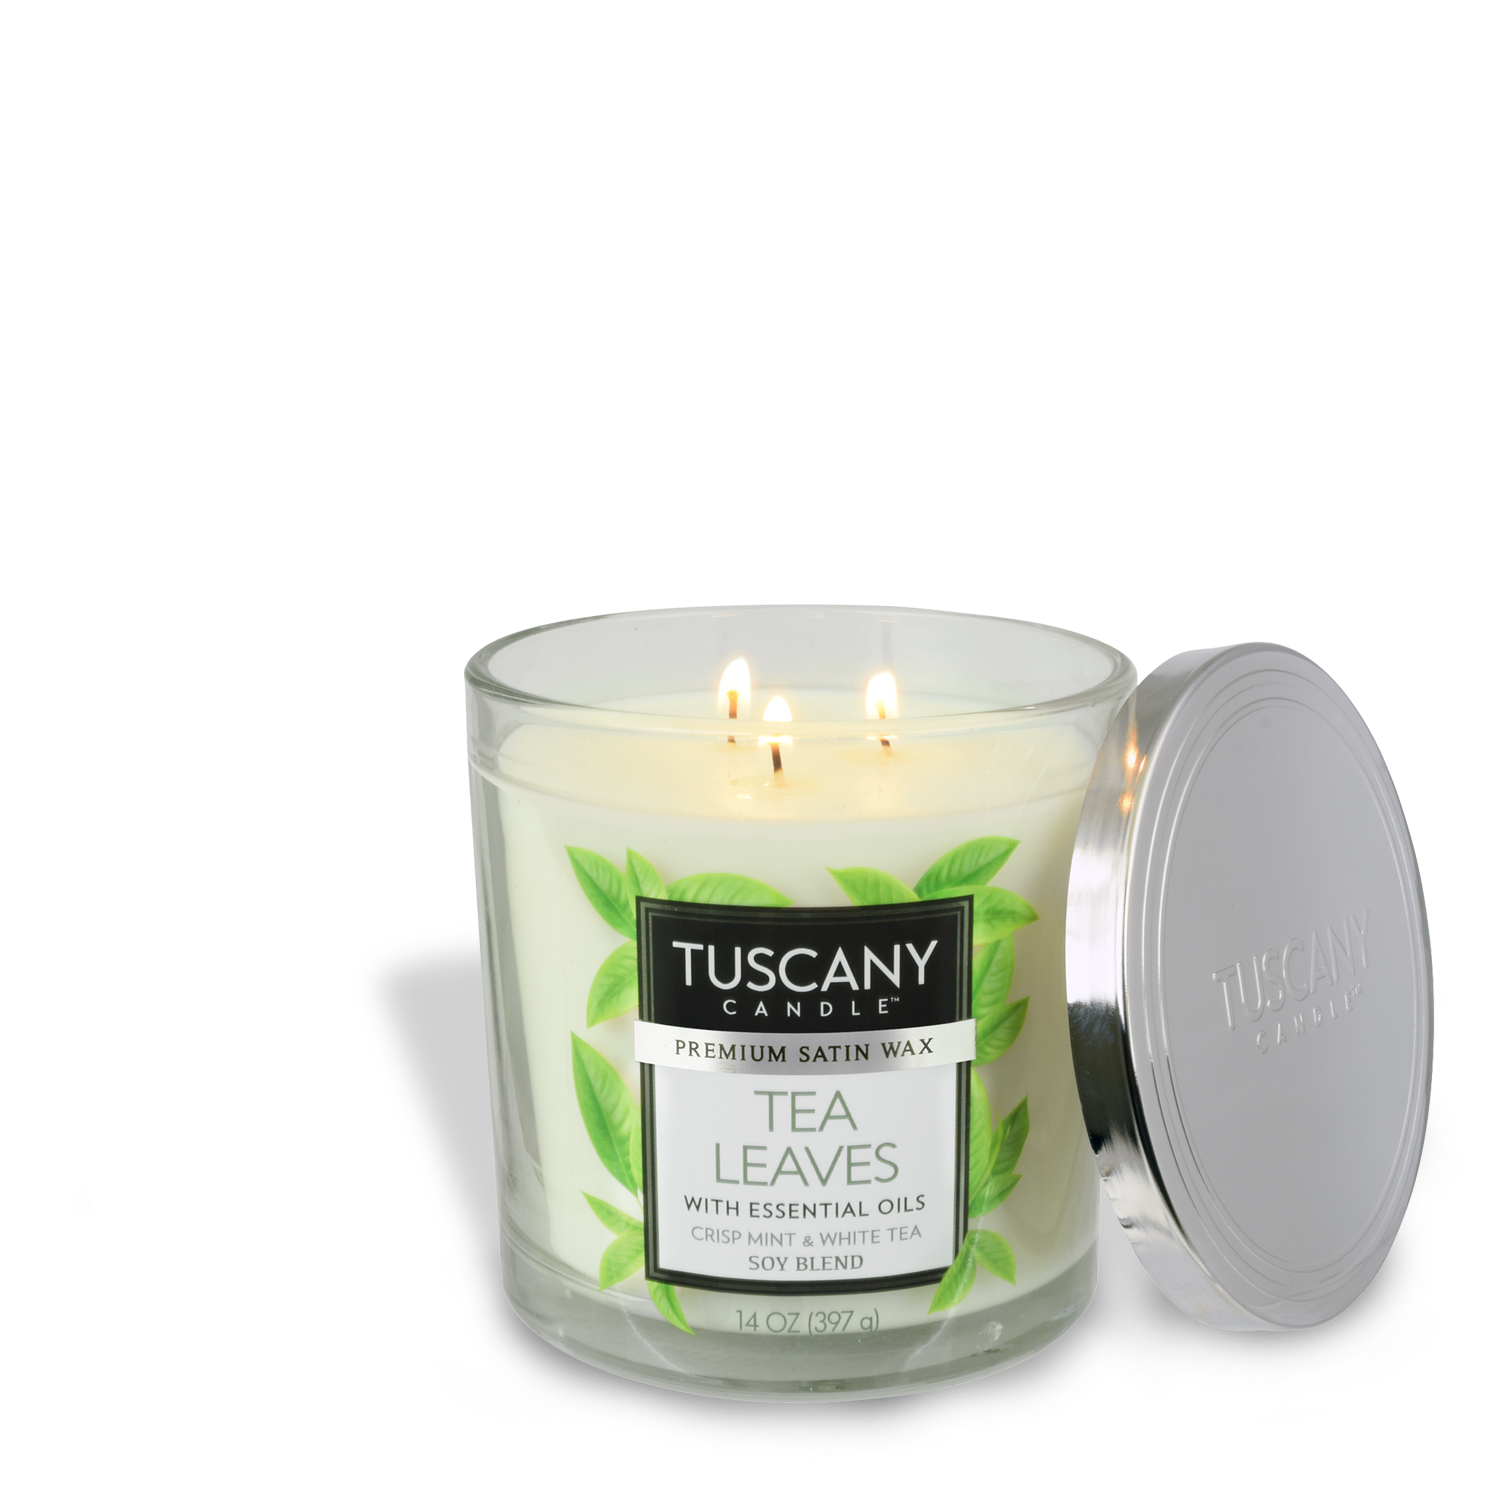 Tuscany Candle's Tea Leaves Long-Lasting Scented Jar Candle (14 oz) made with soy-blend wax for a long-lasting aroma.